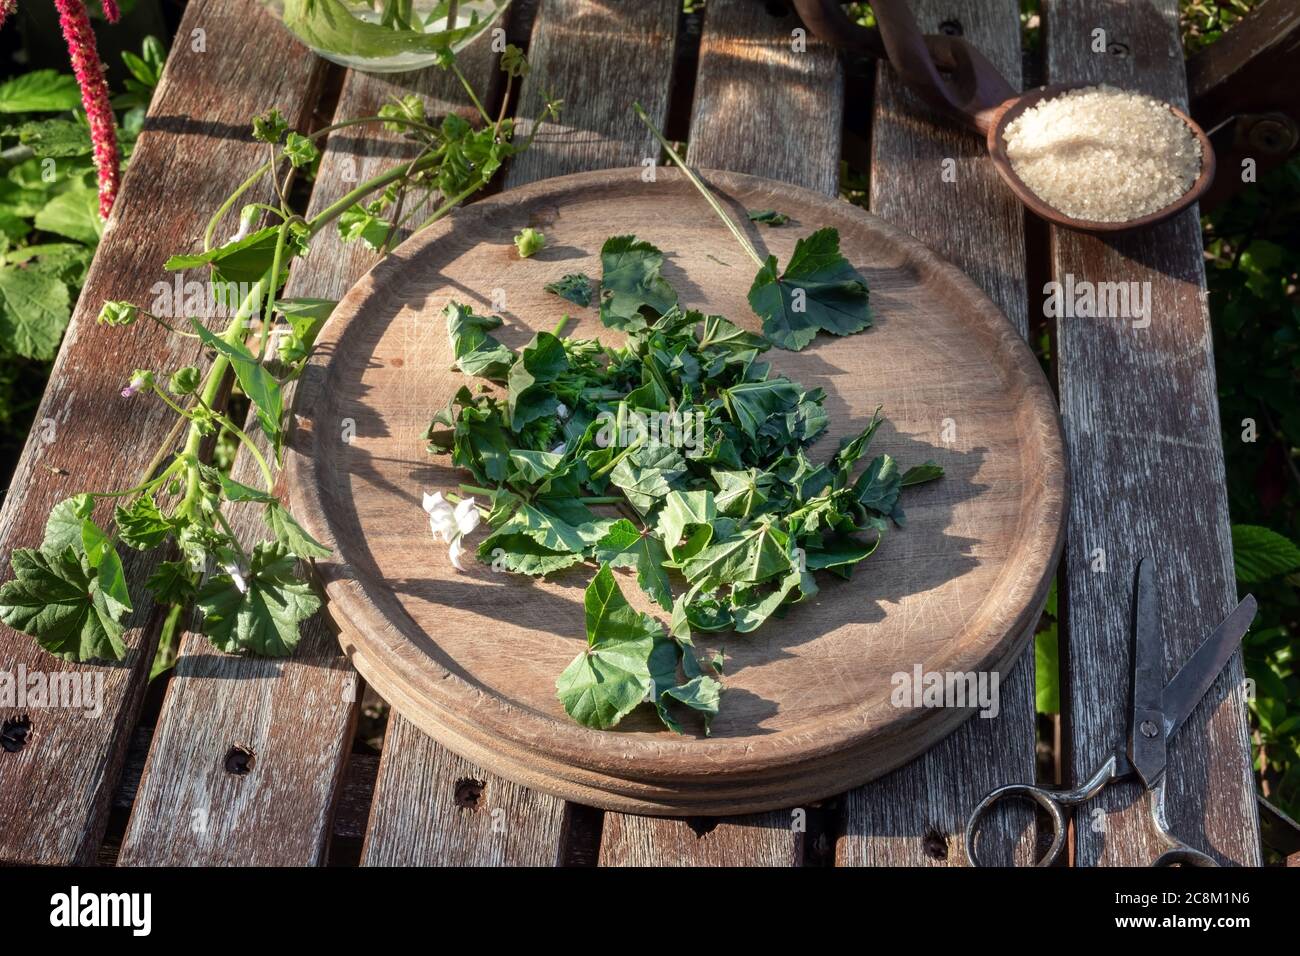 Preparation of mallow syrup from fresh Malva neglecta plant, outdoors Stock Photo